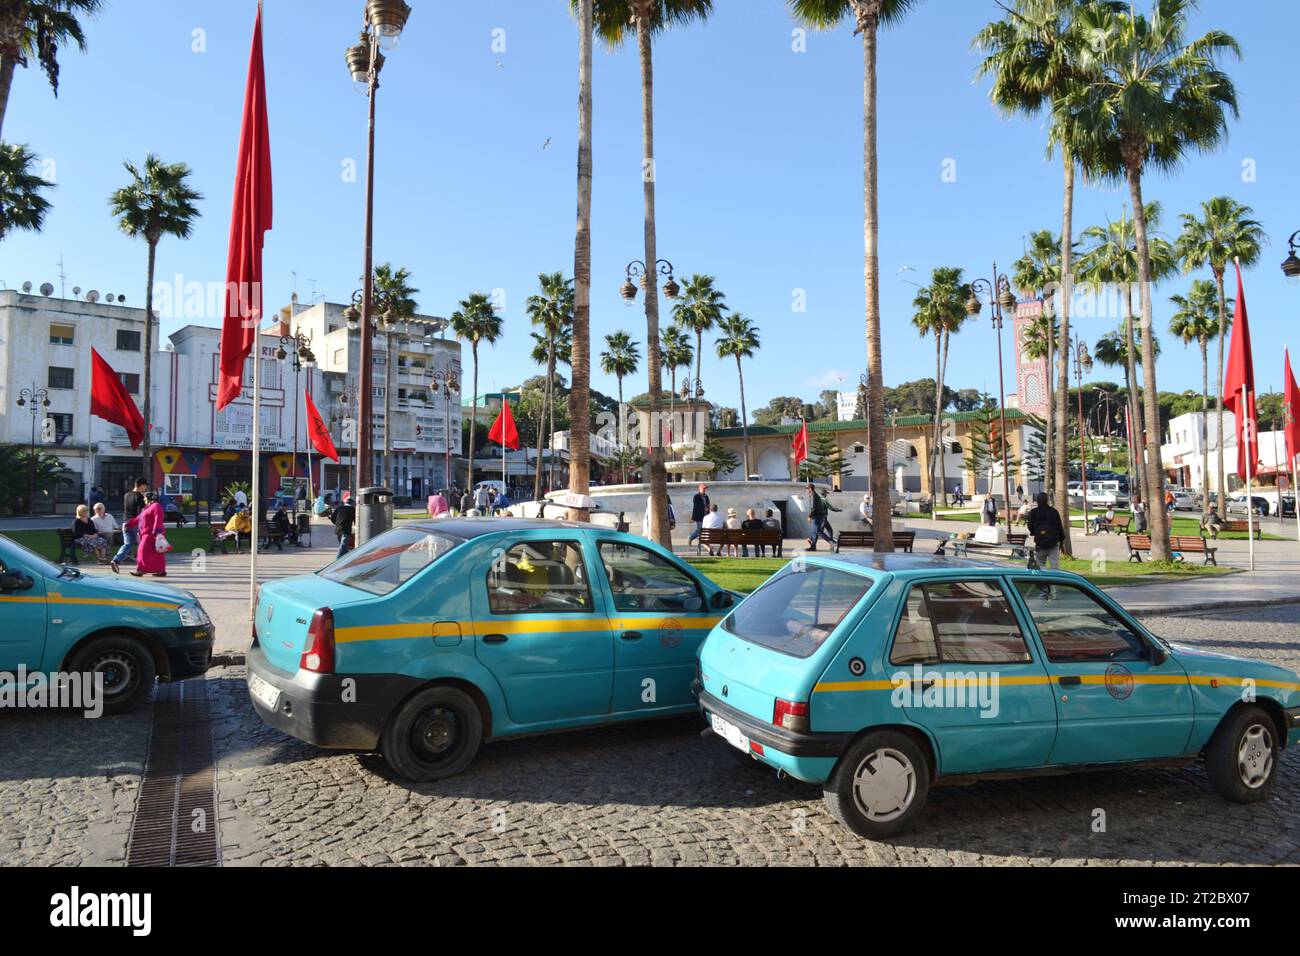 TANGIER, MOROCCO - NOVEMBER 9, 2015: Petits Taxis (Eng. small taxis) at Grand Socco (officially known as Place du Grand 9 Avril 1947), a large square. Stock Photo